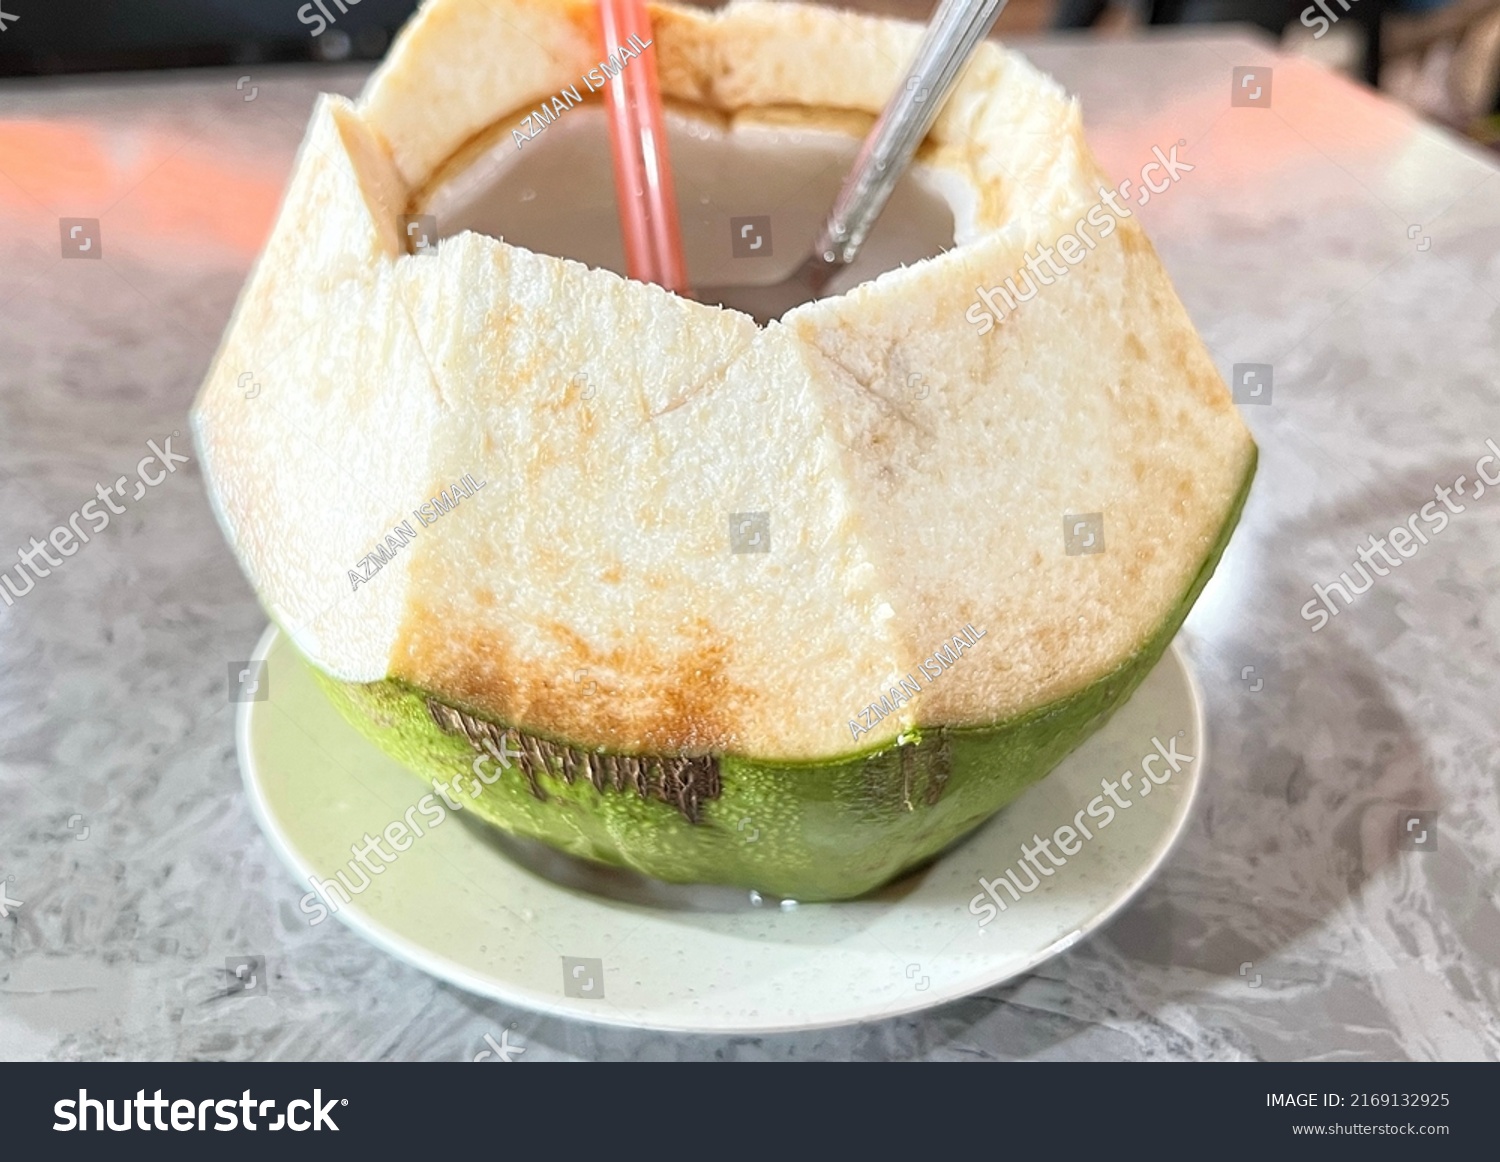 Stock Photo Pandan Coconut Is A Type Of Coconut That Contains Delicious And Cold Water 2169132925 